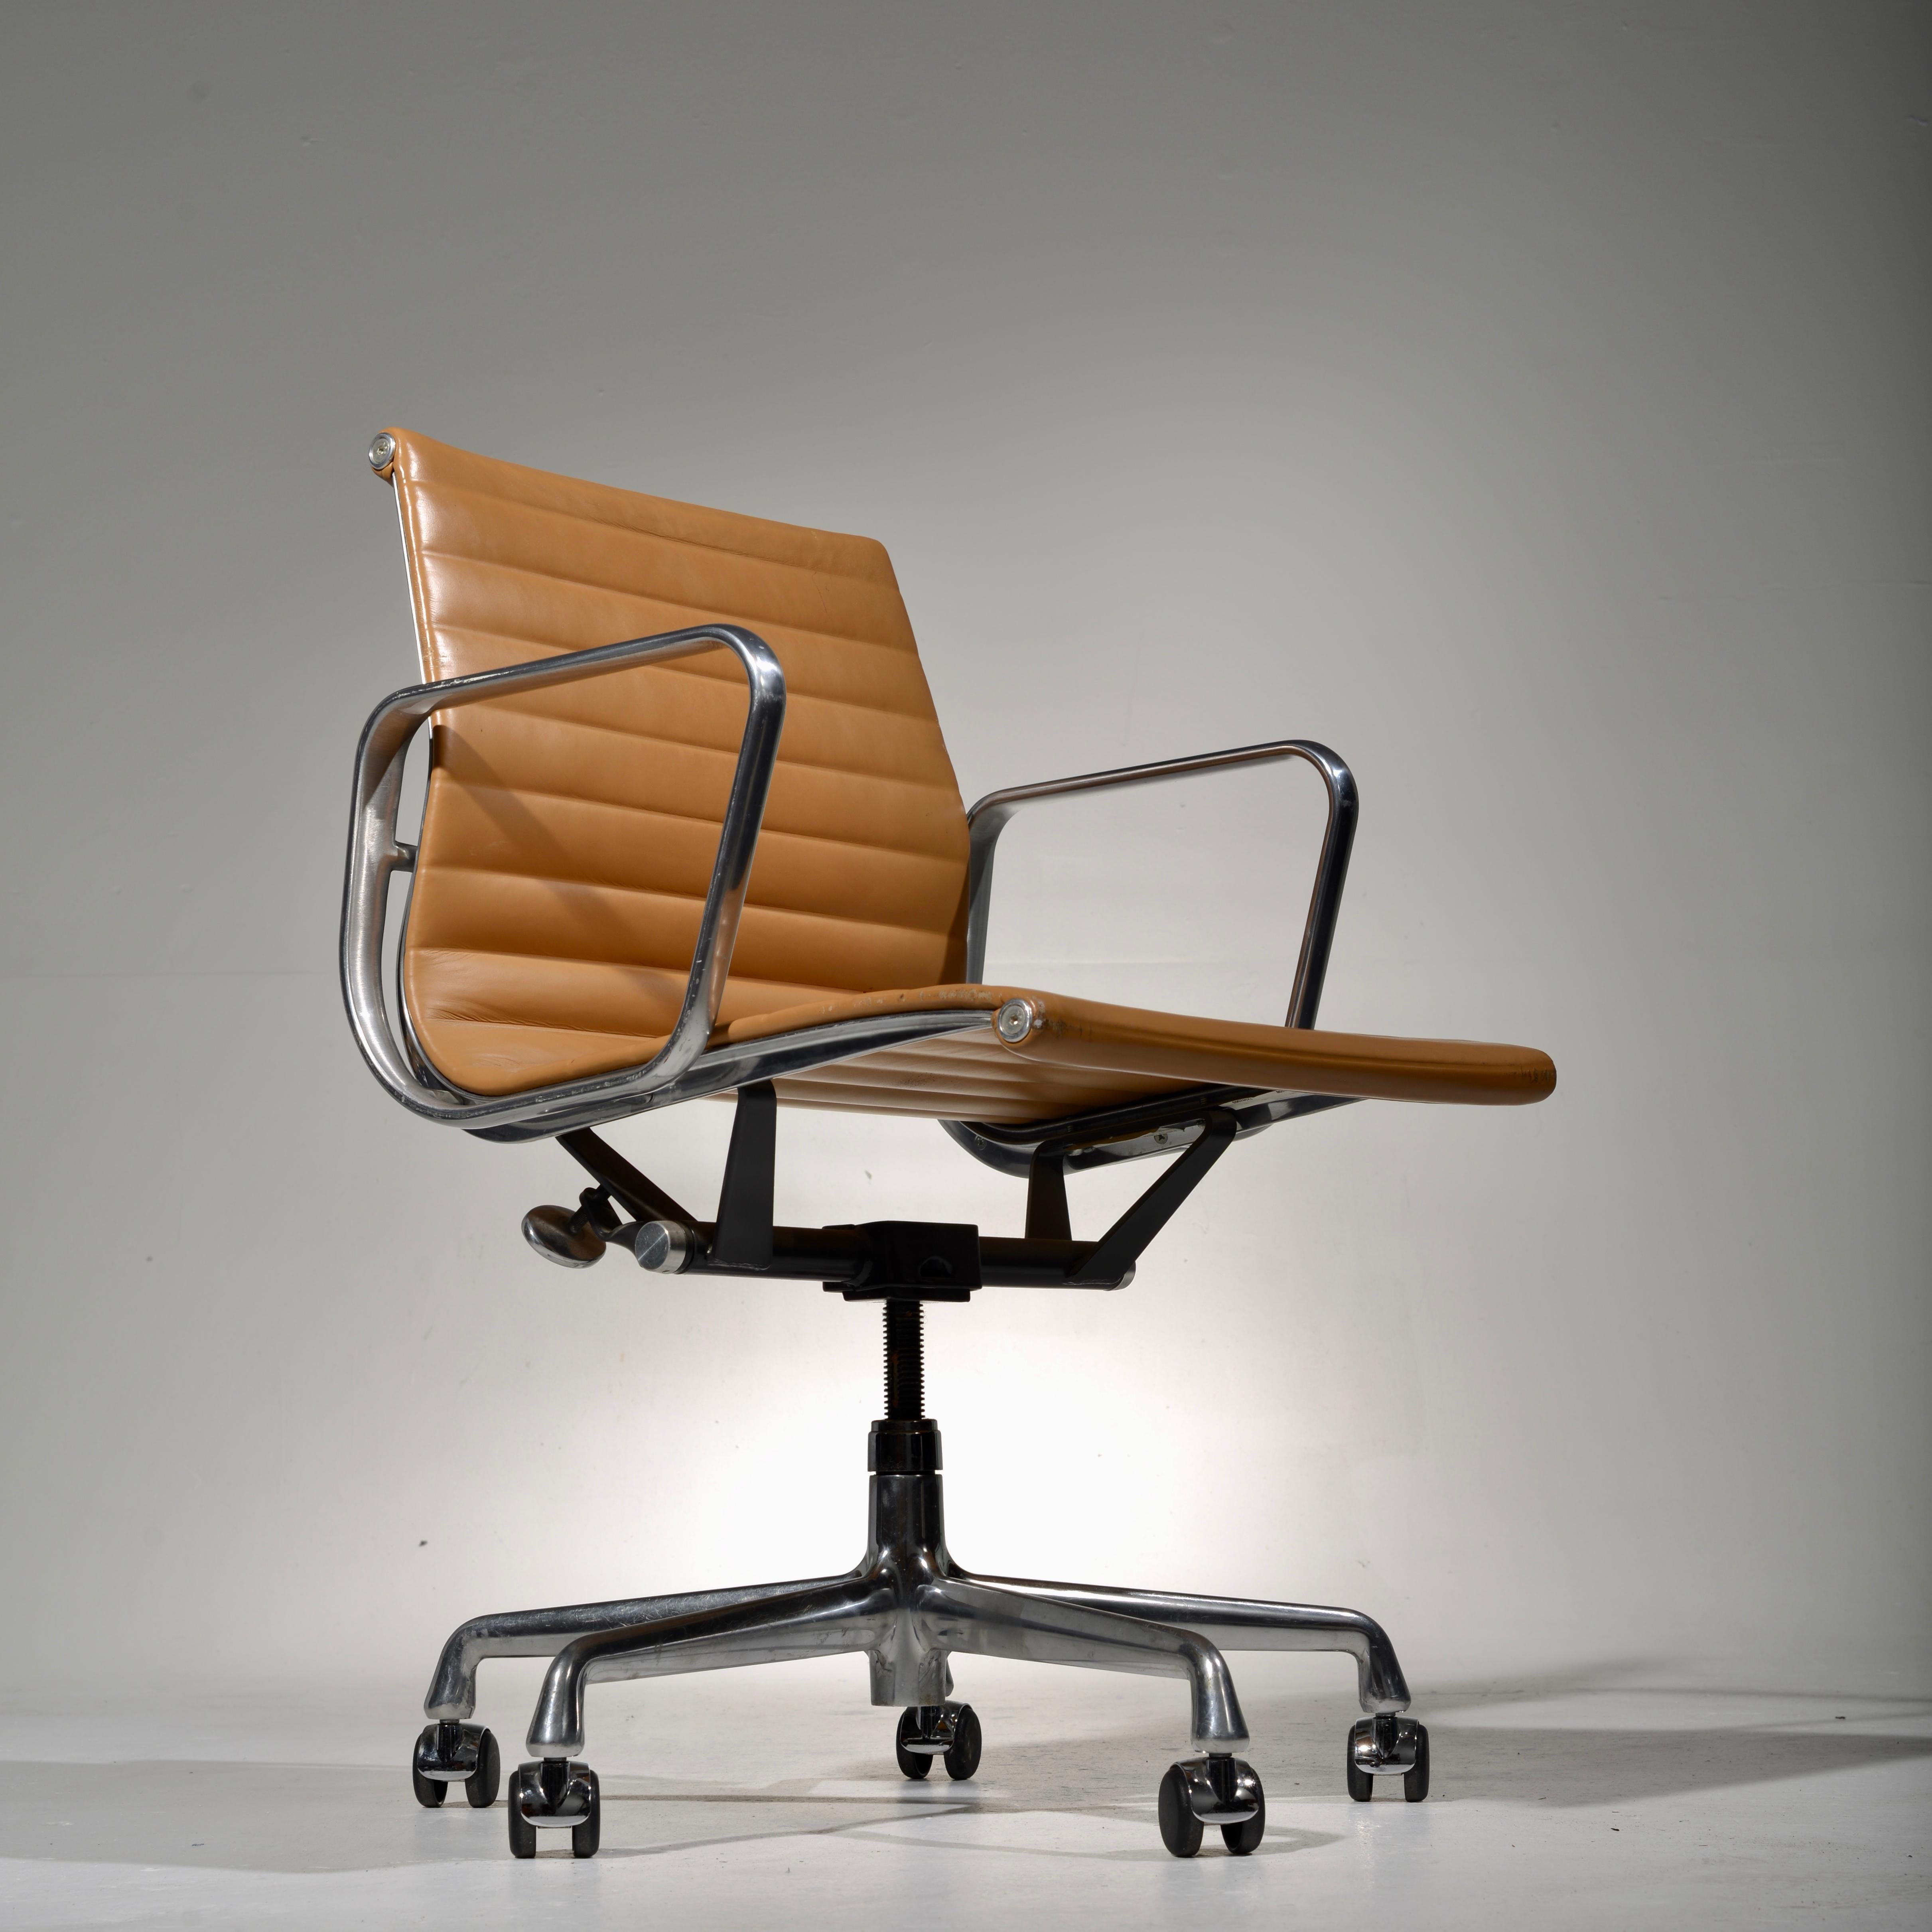 Set of 4 Eames Aluminum Group desk chairs on a five-star, swiveling, rocking, rolling base with matching arms, in a very rare tan leather. Seat height is adjustable. These chairs are in excellent condition. The leather is soft and pliable. Sold